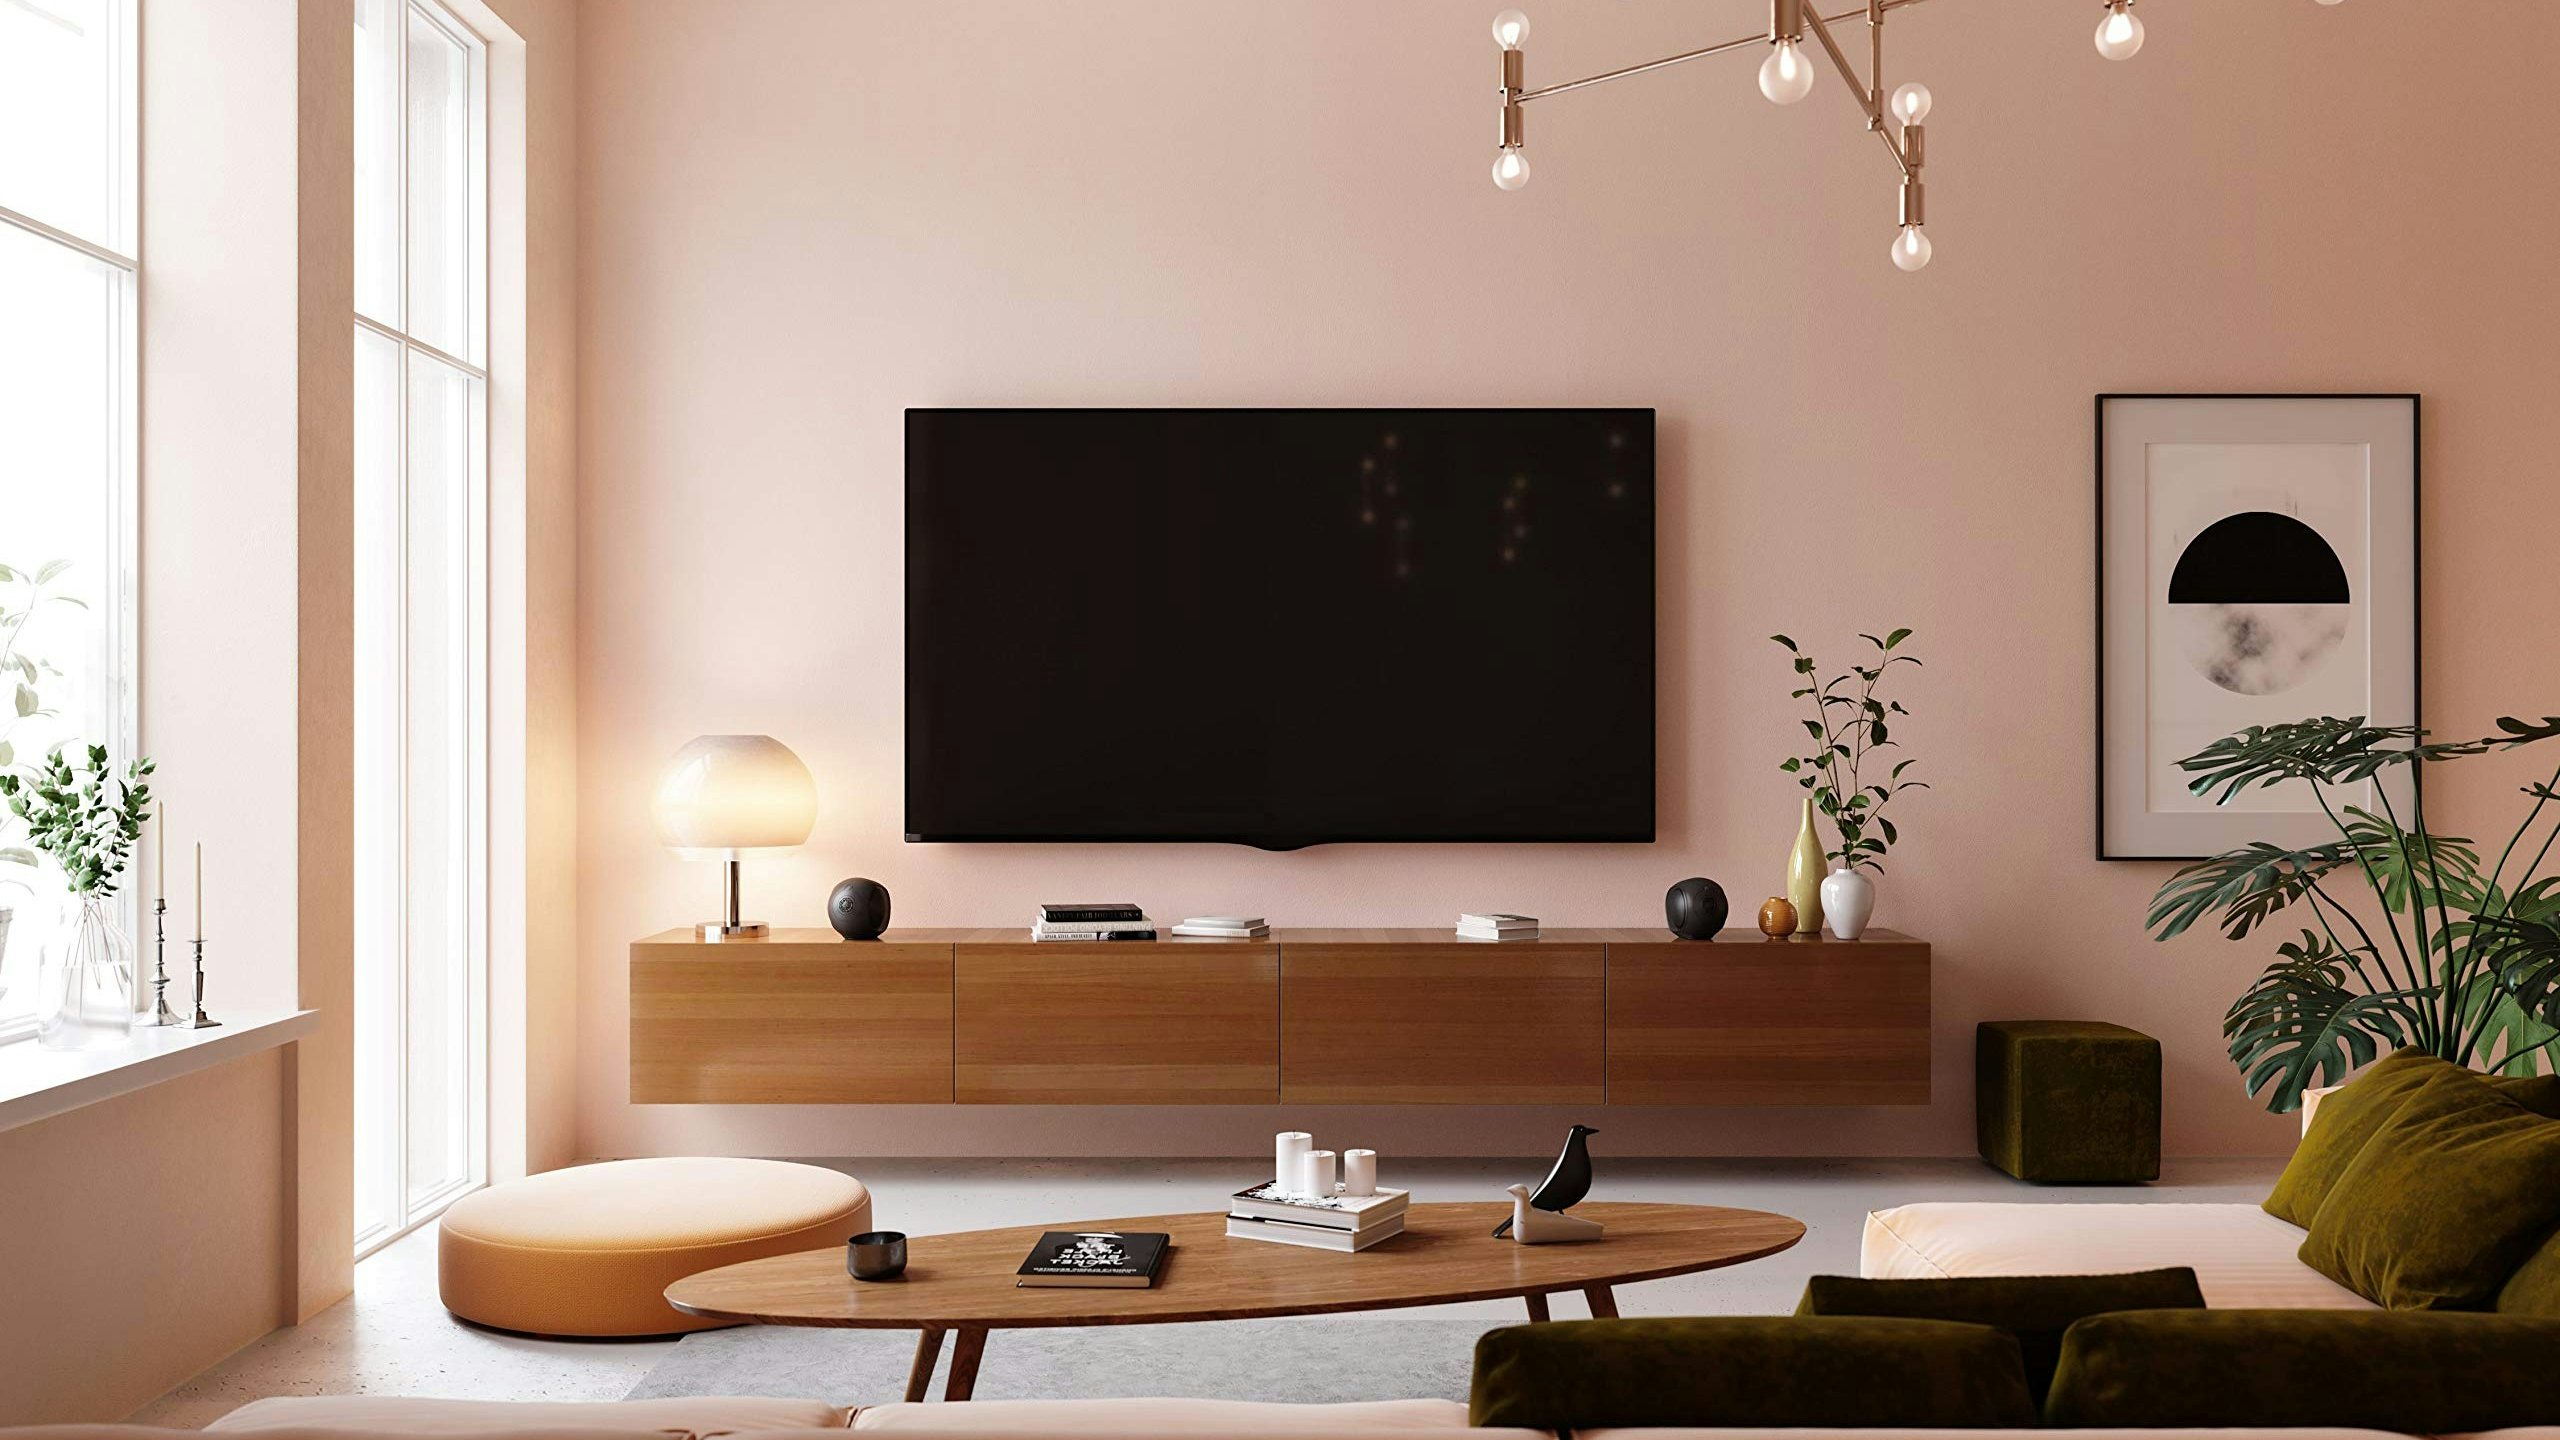 From luxe loudspeakers to hi-tech fitness gadgets, pandemic constraints have heightened consumer demand for numerous luxury home appliances. Photo: Courtesy of Devialet